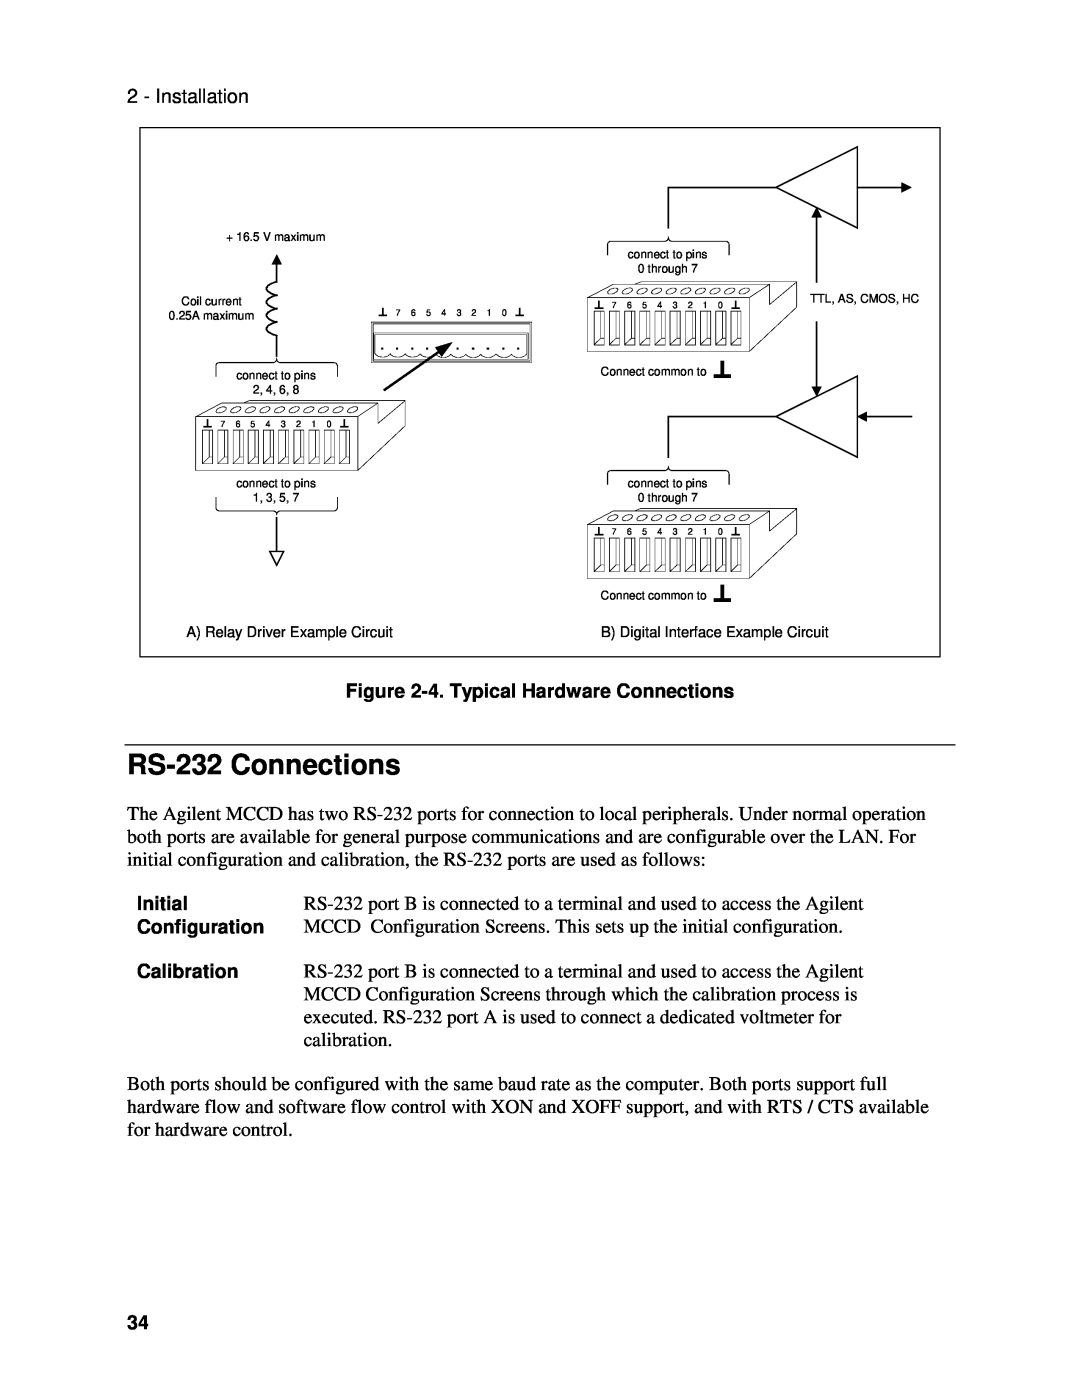 Agilent Technologies E4371A manual RS-232 Connections, 4. Typical Hardware Connections, Initial, Configuration, Calibration 